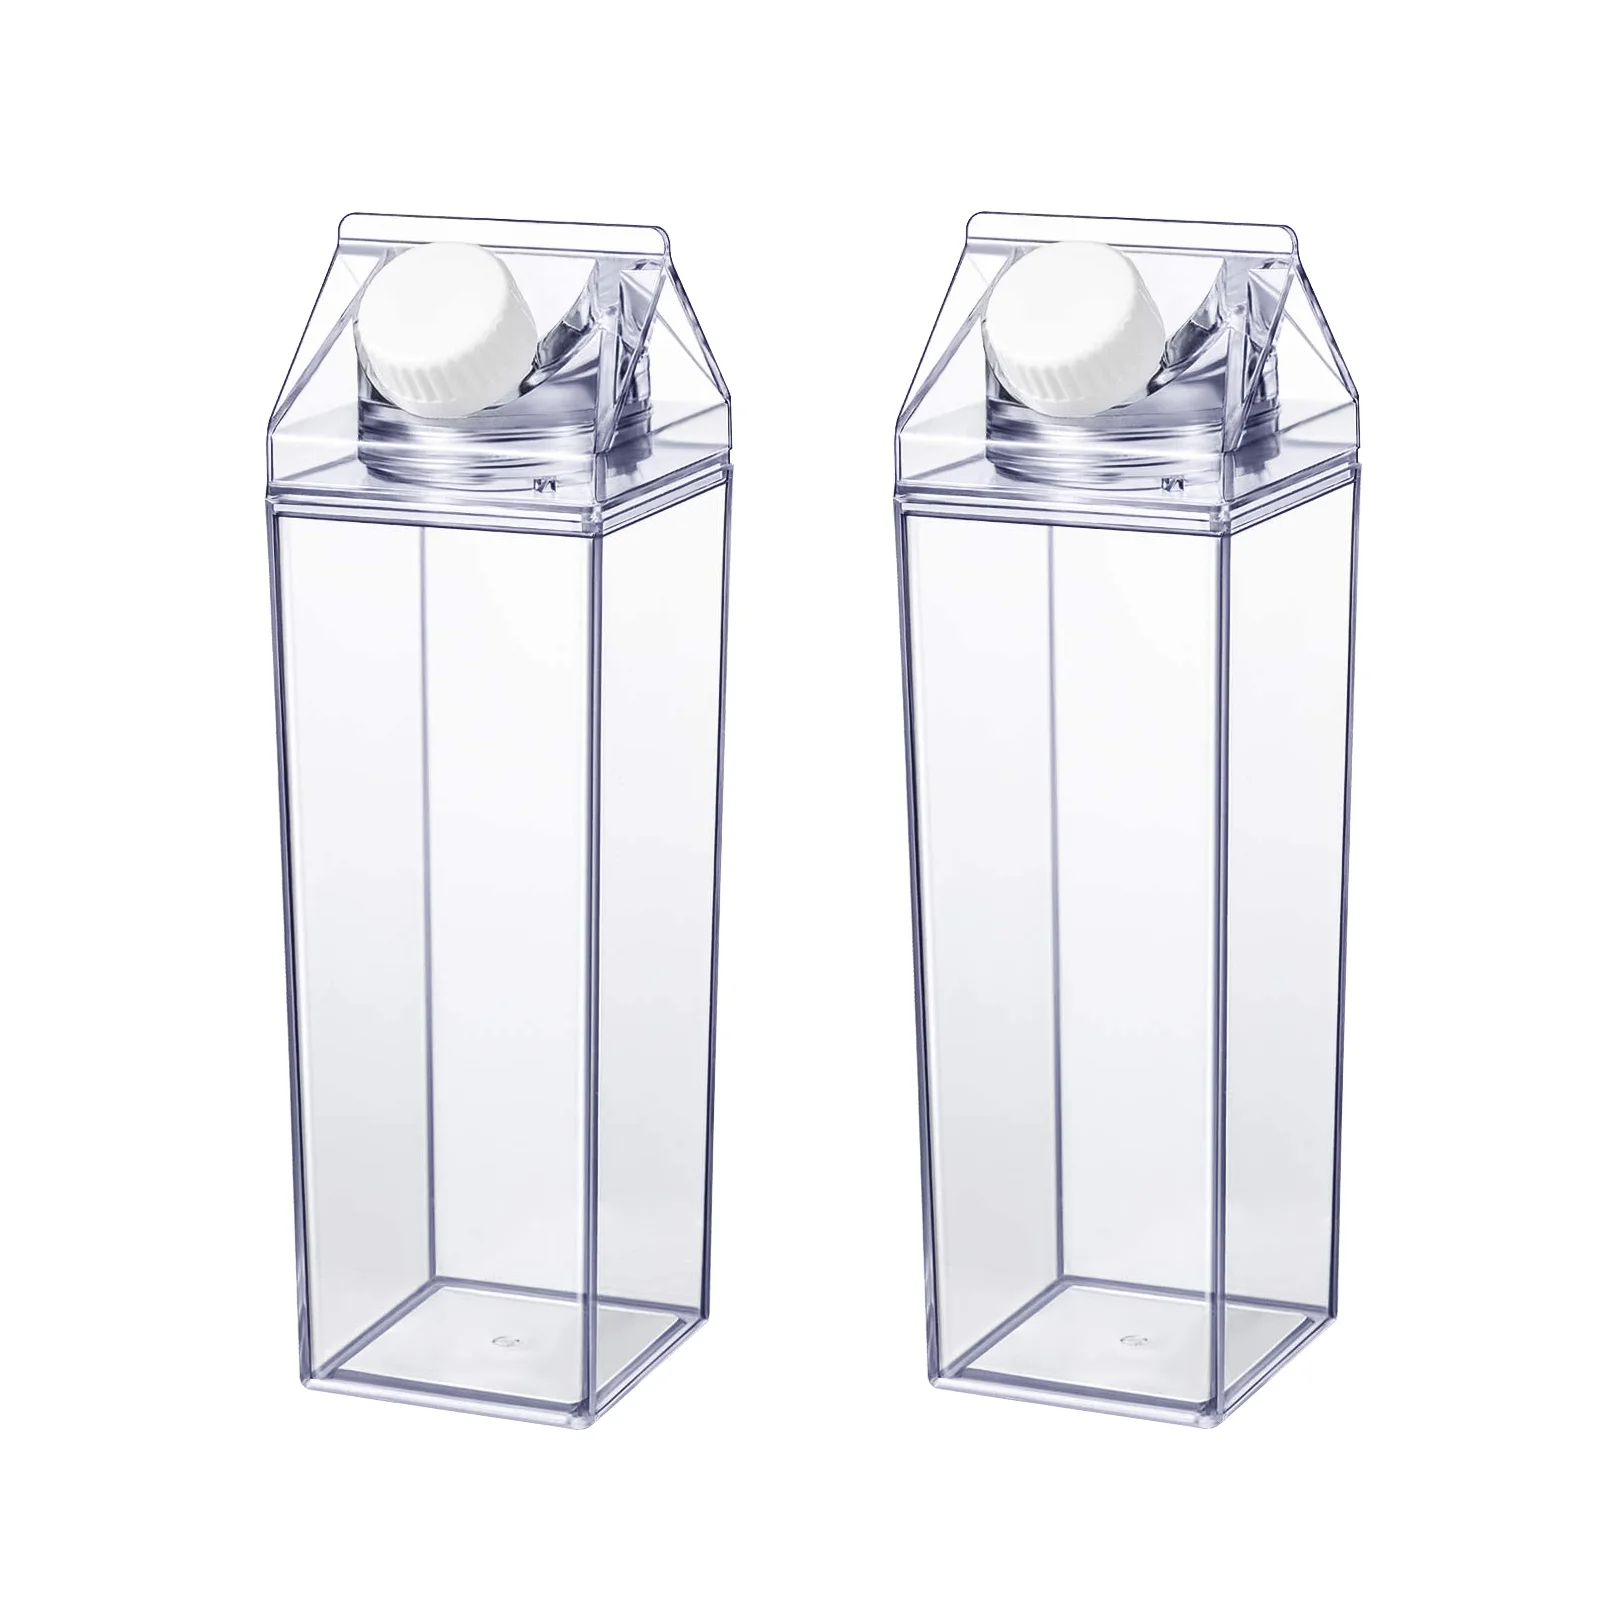 

Bottle Carton Water Bottles Square Clear Plastic 500Ml Container Drink Parties Acrylic Coffee Aesthetic Empty Storage